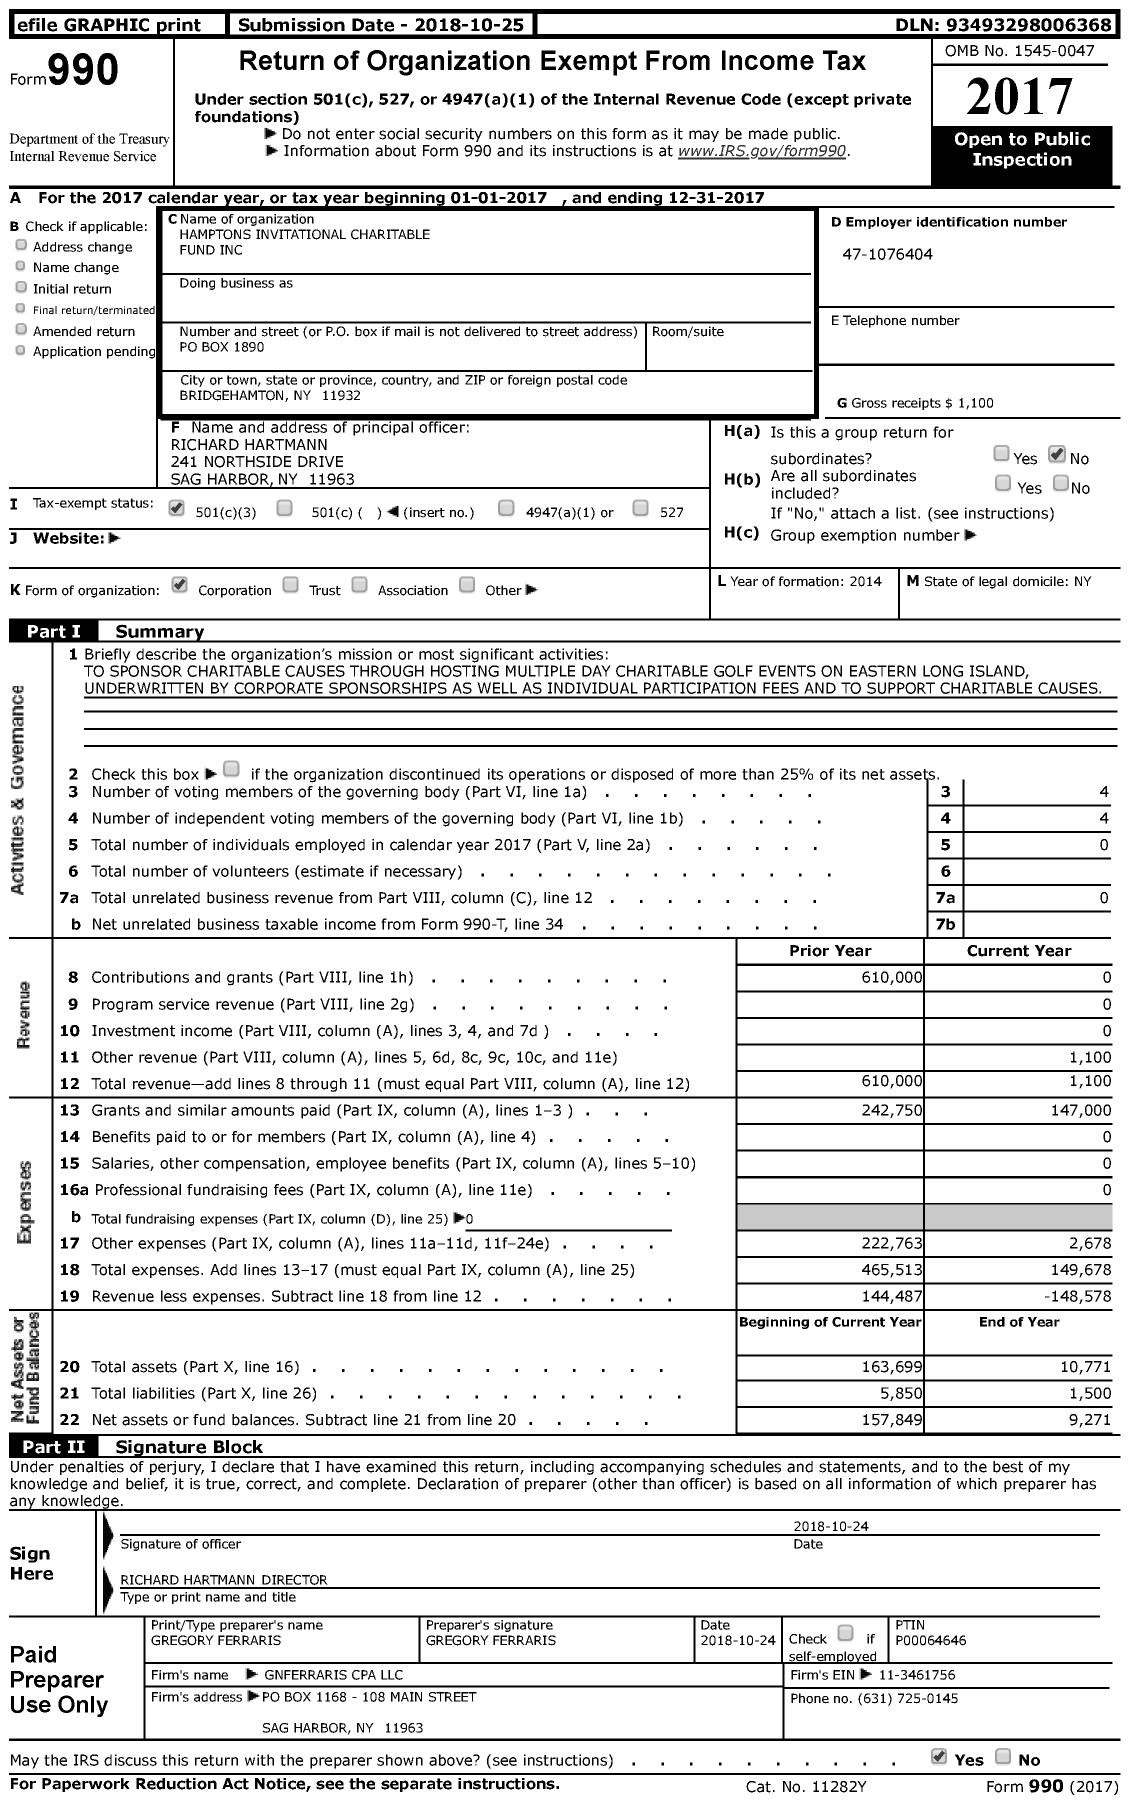 Image of first page of 2017 Form 990 for Hamptons Invitational Charitable Fund